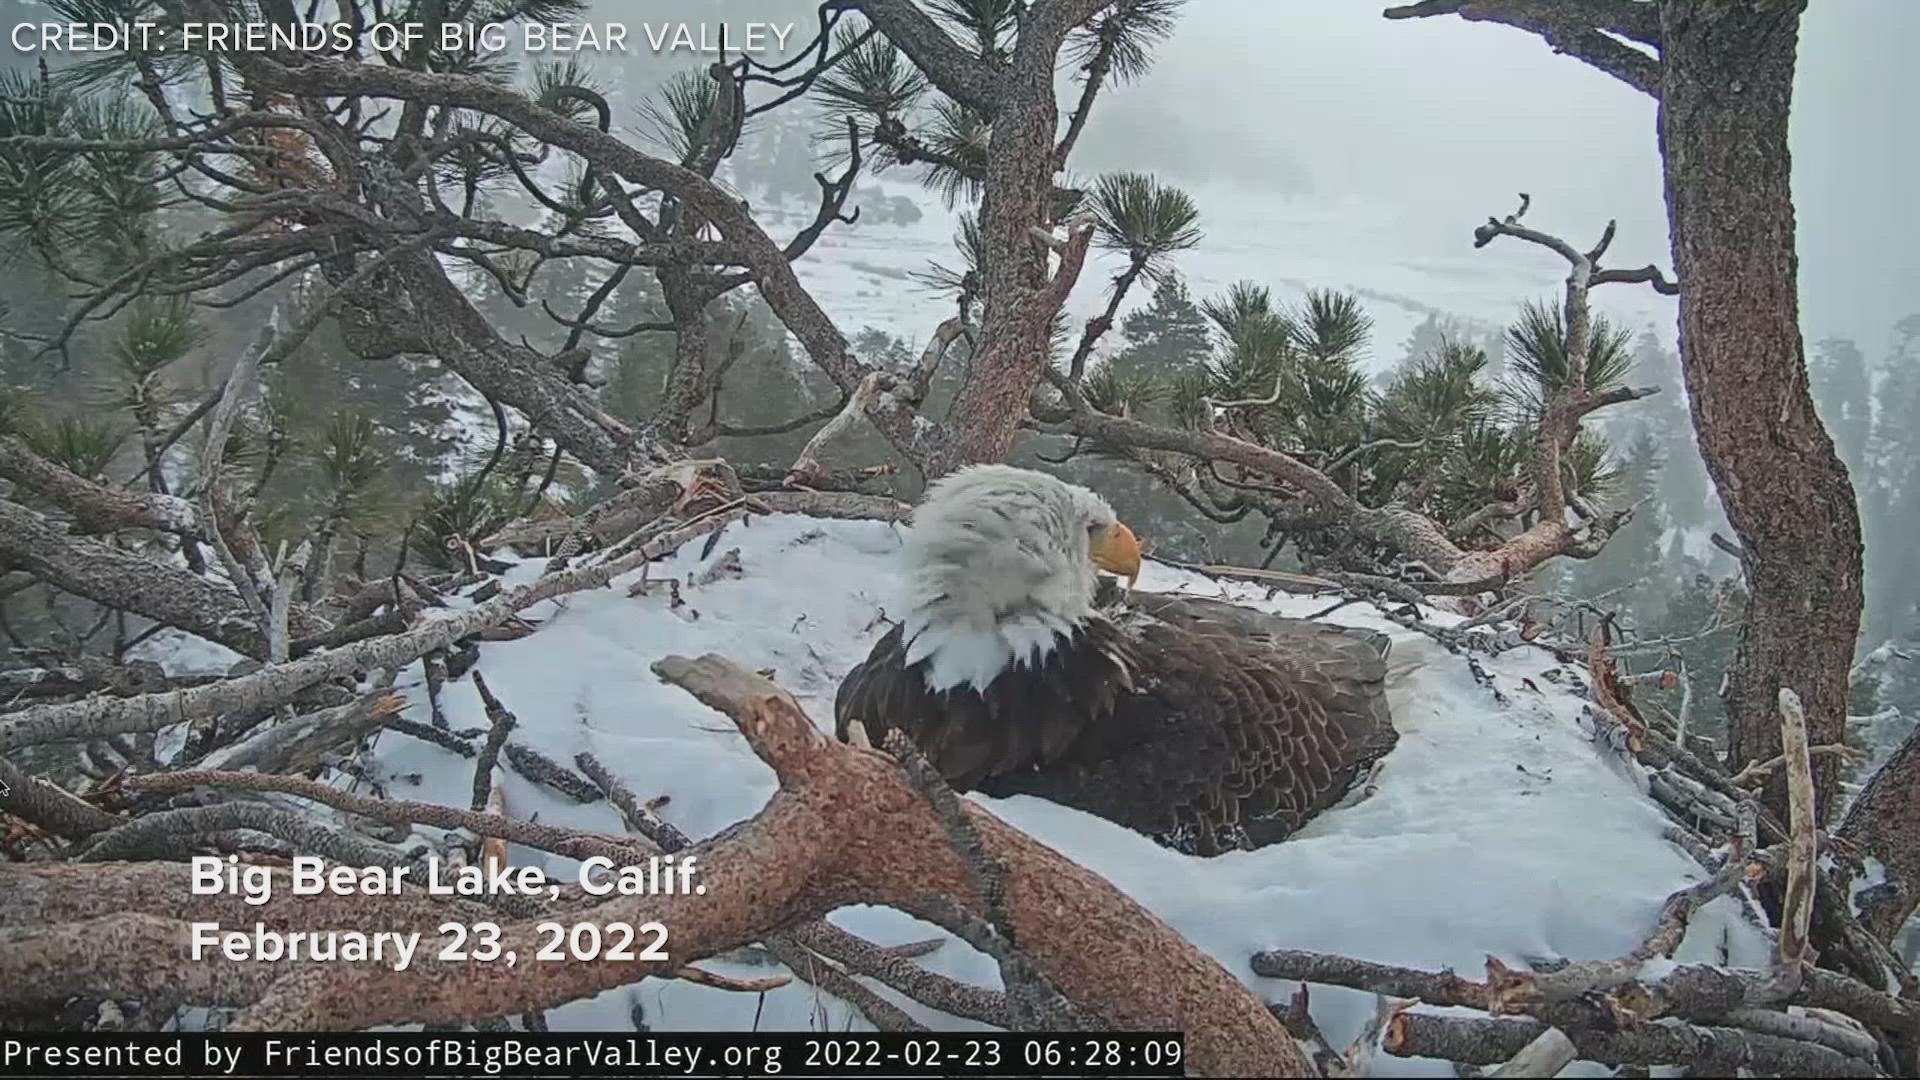 Watch bald eagles Jackie and Shadow tending to their nest with two eggs near Big Bear Lake, Calif.